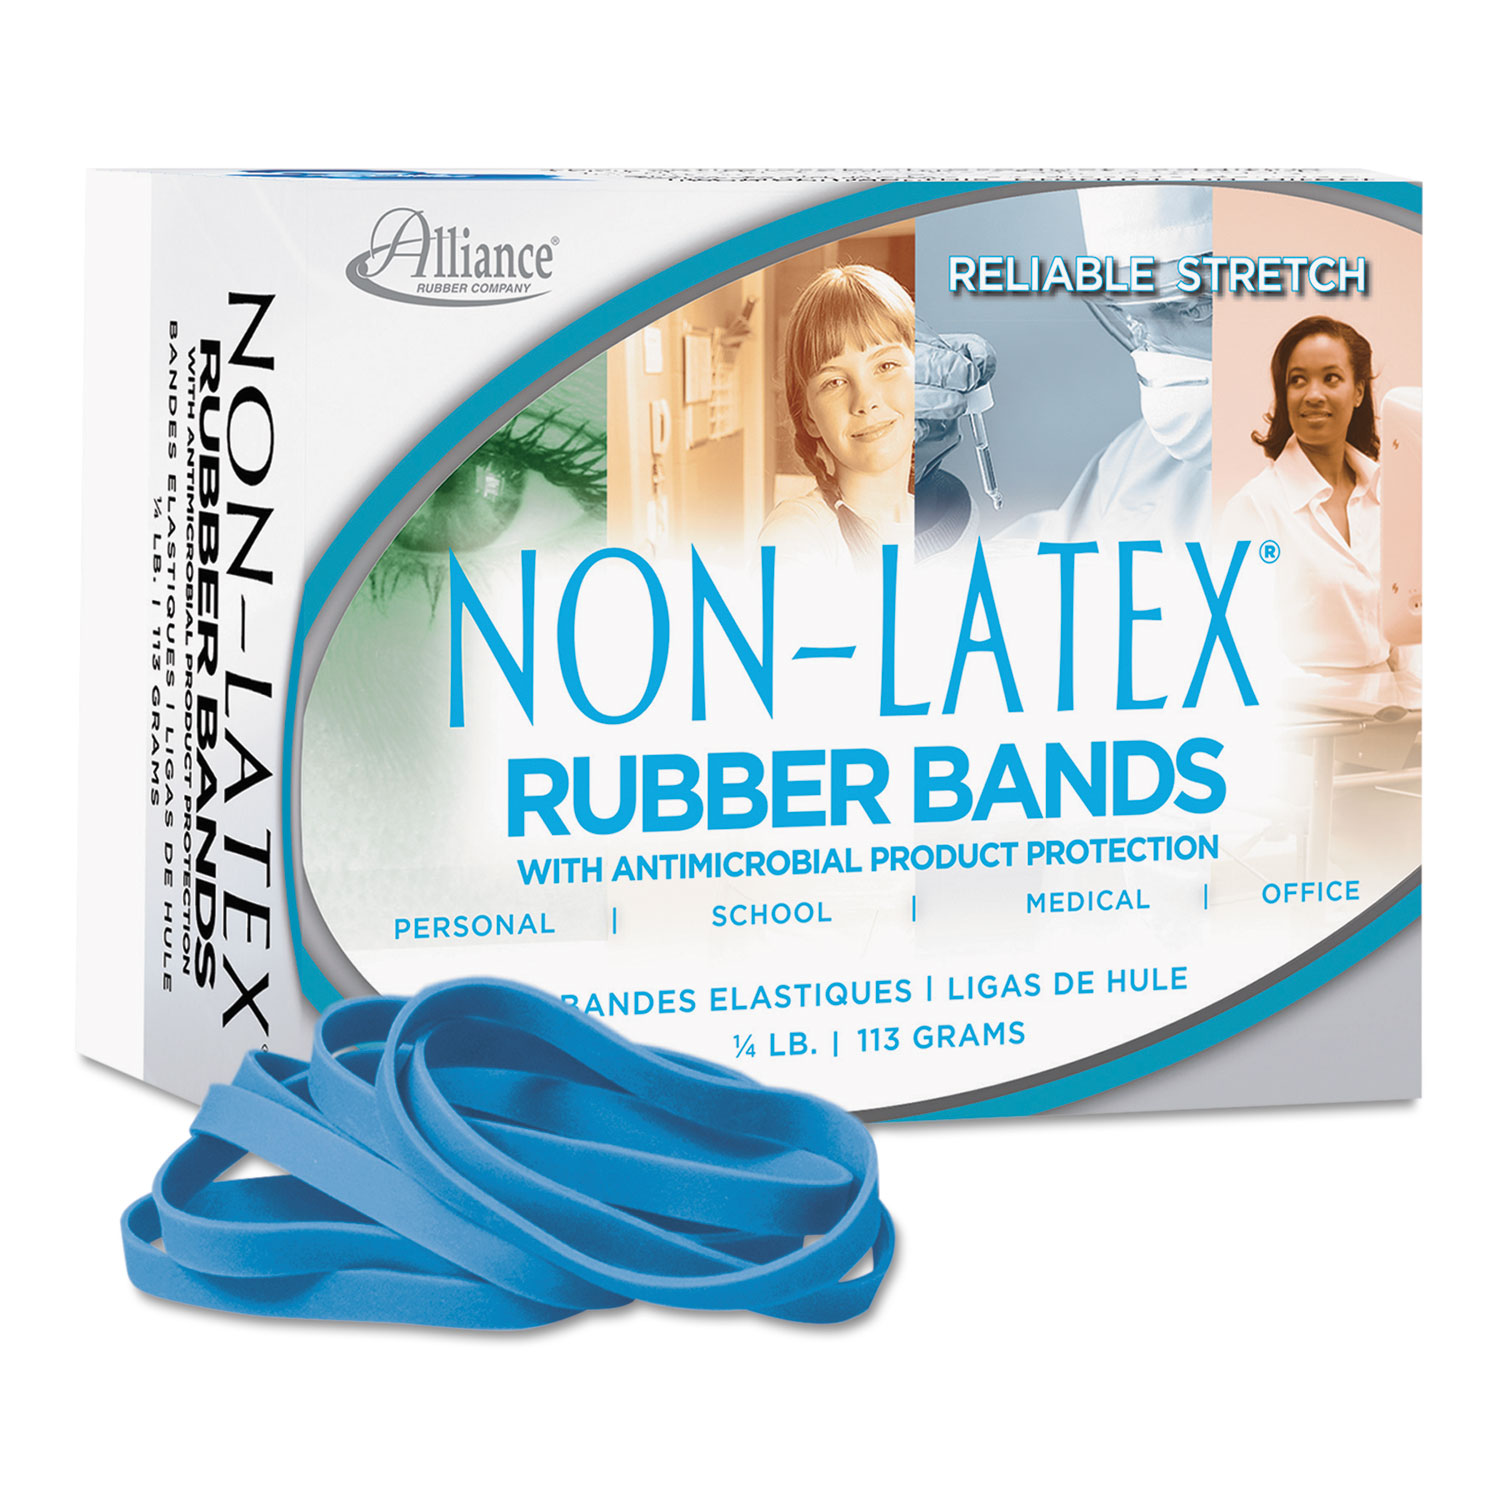  Alliance ALL42649 Antimicrobial Non-Latex Rubber Bands, Size 64, 0.04 Gauge, Cyan Blue, 4 oz Box, 95/Box (ALL42649) 